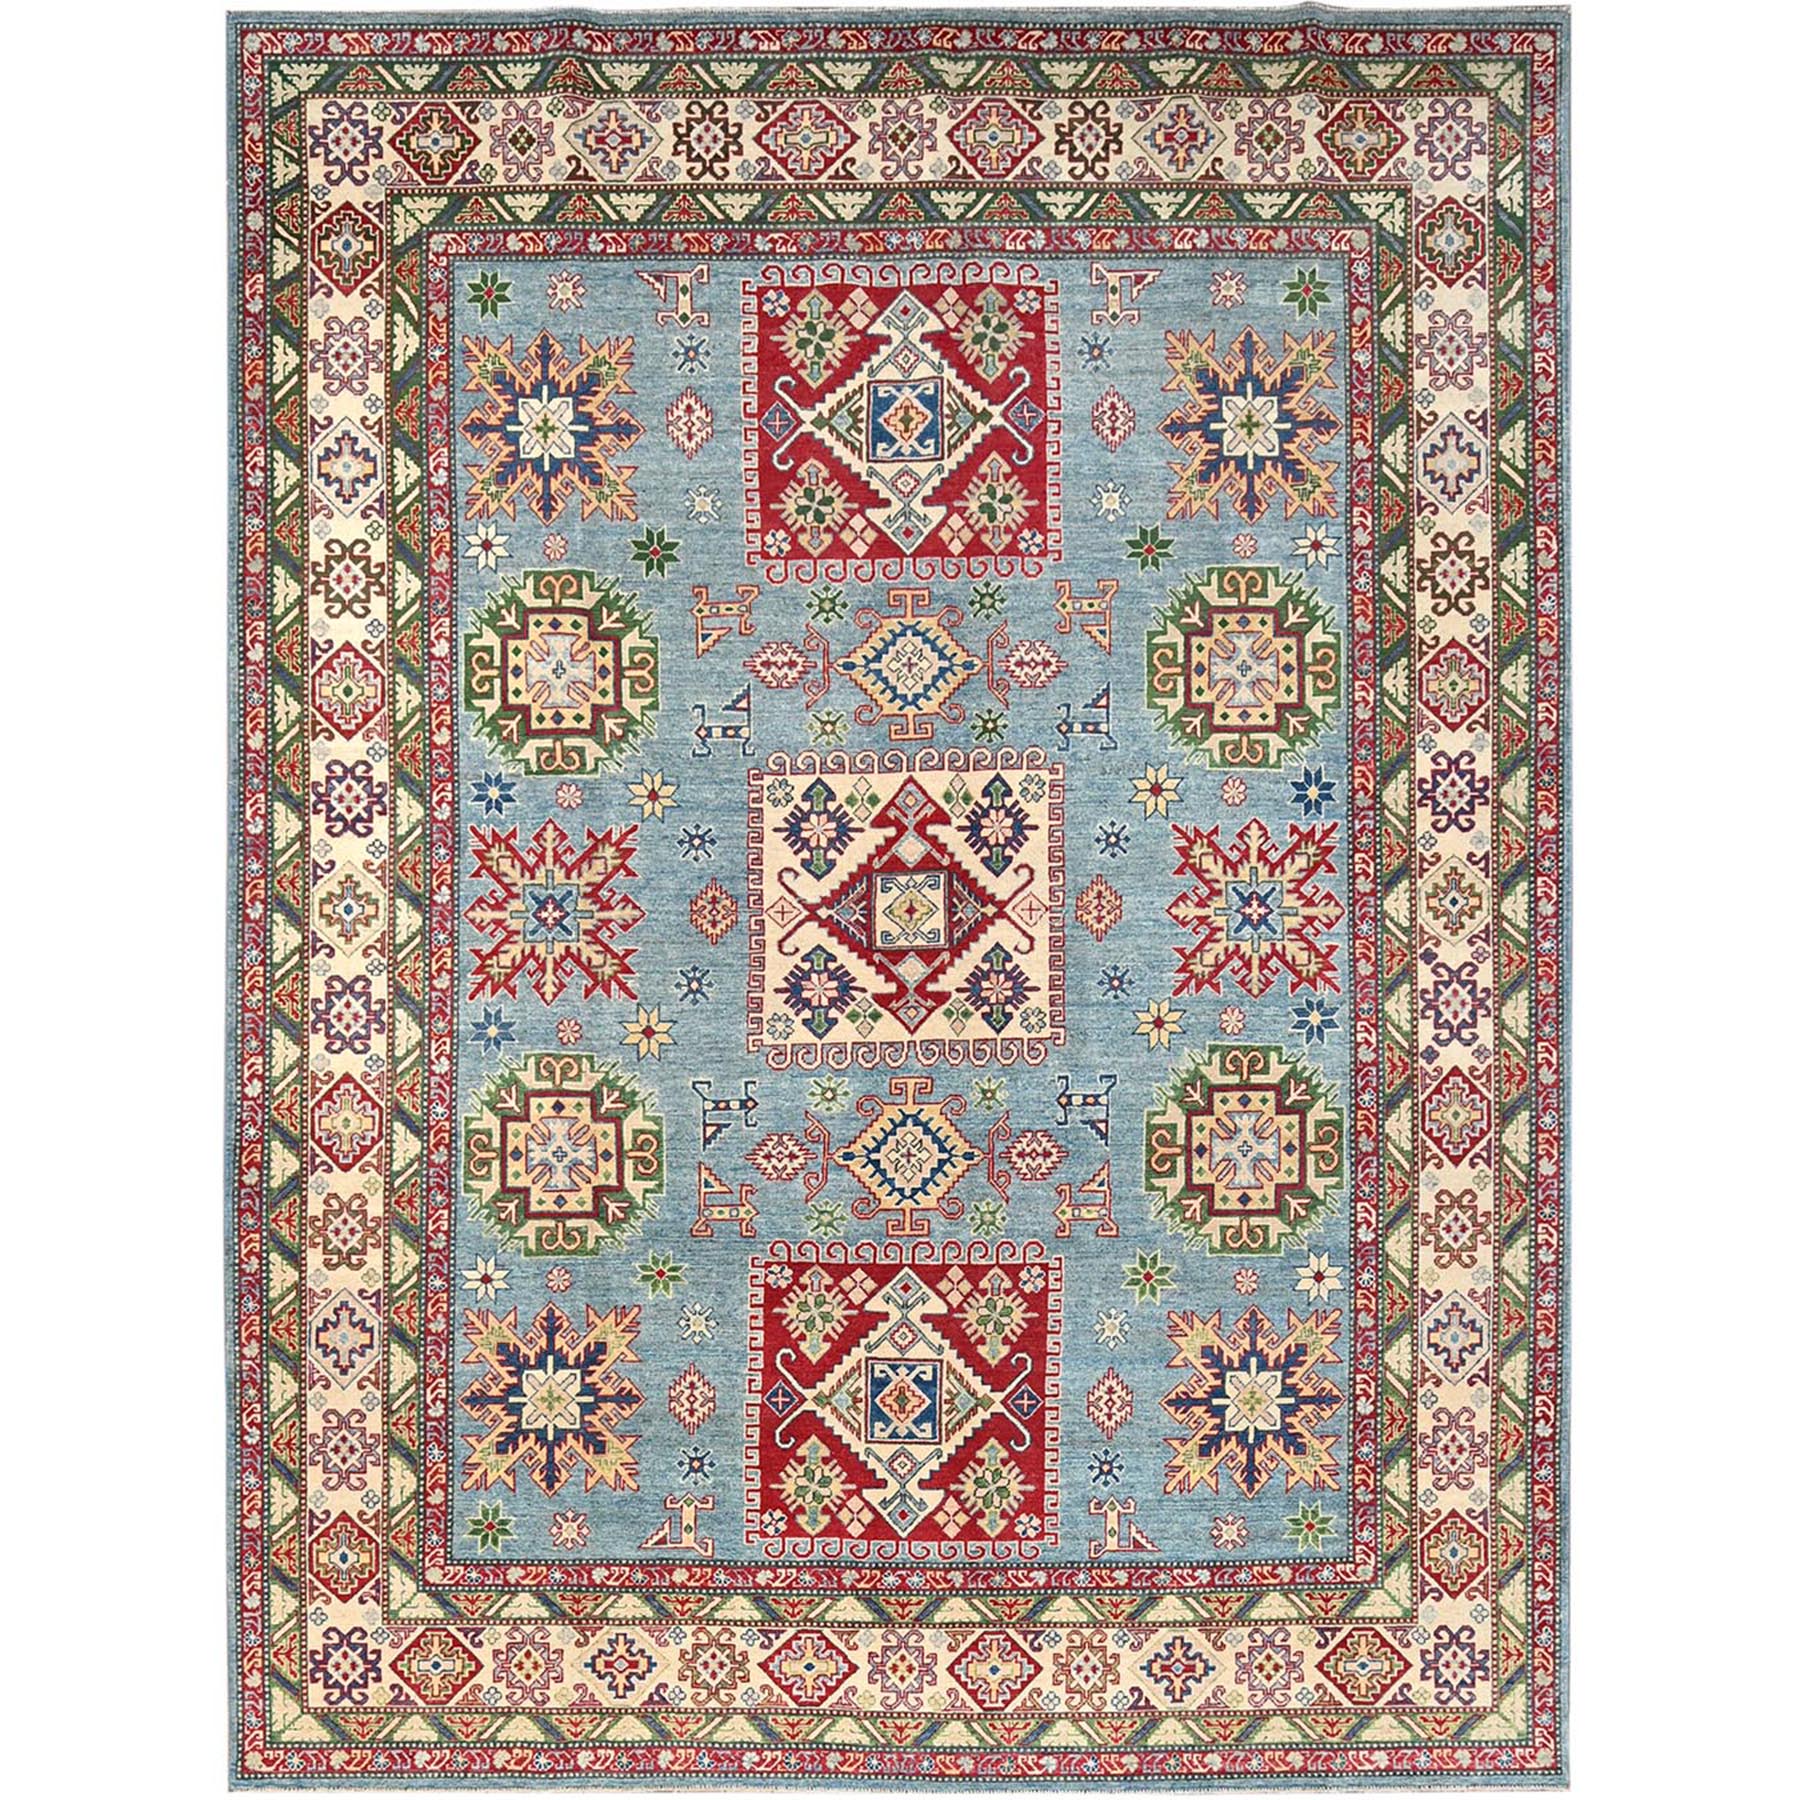 Venus Blue With Ivory Border, Tribal Pattern, Vegetable  Dyes With Densely Woven, Hand Knotted Pure Wool Kazak, Oriental Rug 